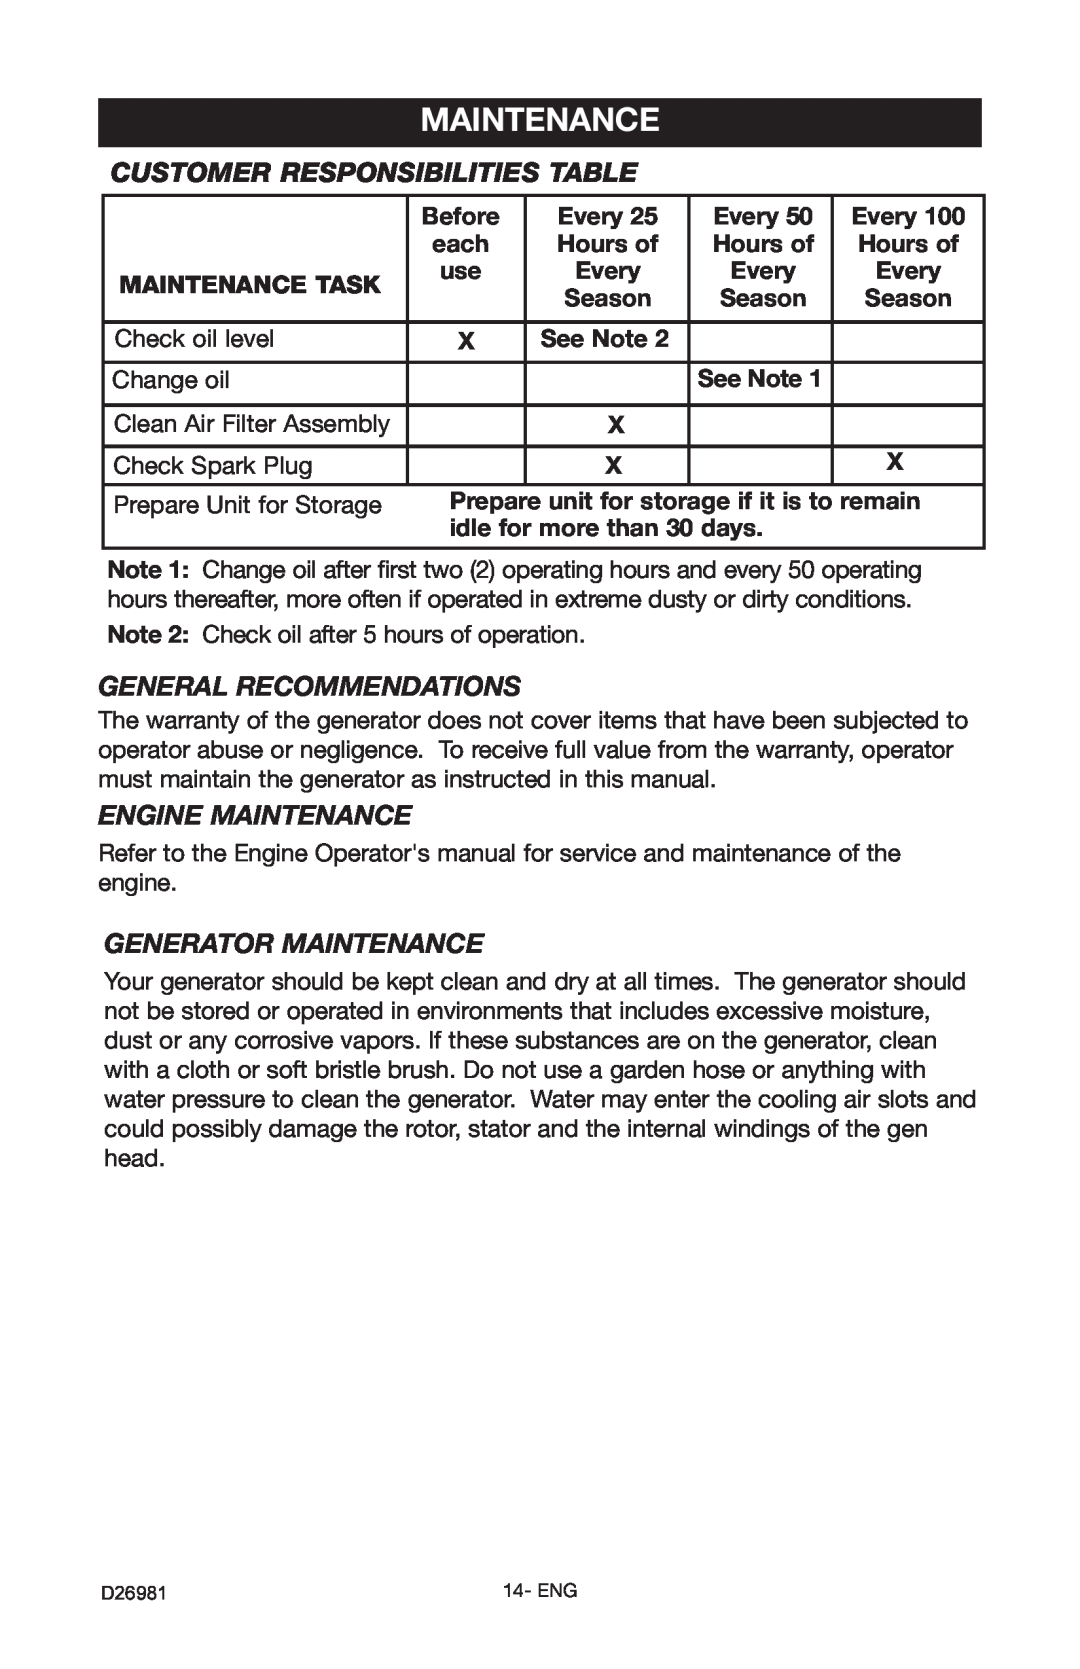 Porter-Cable D26981-028-0 Customer Responsibilities Table, General Recommendations, Engine Maintenance 